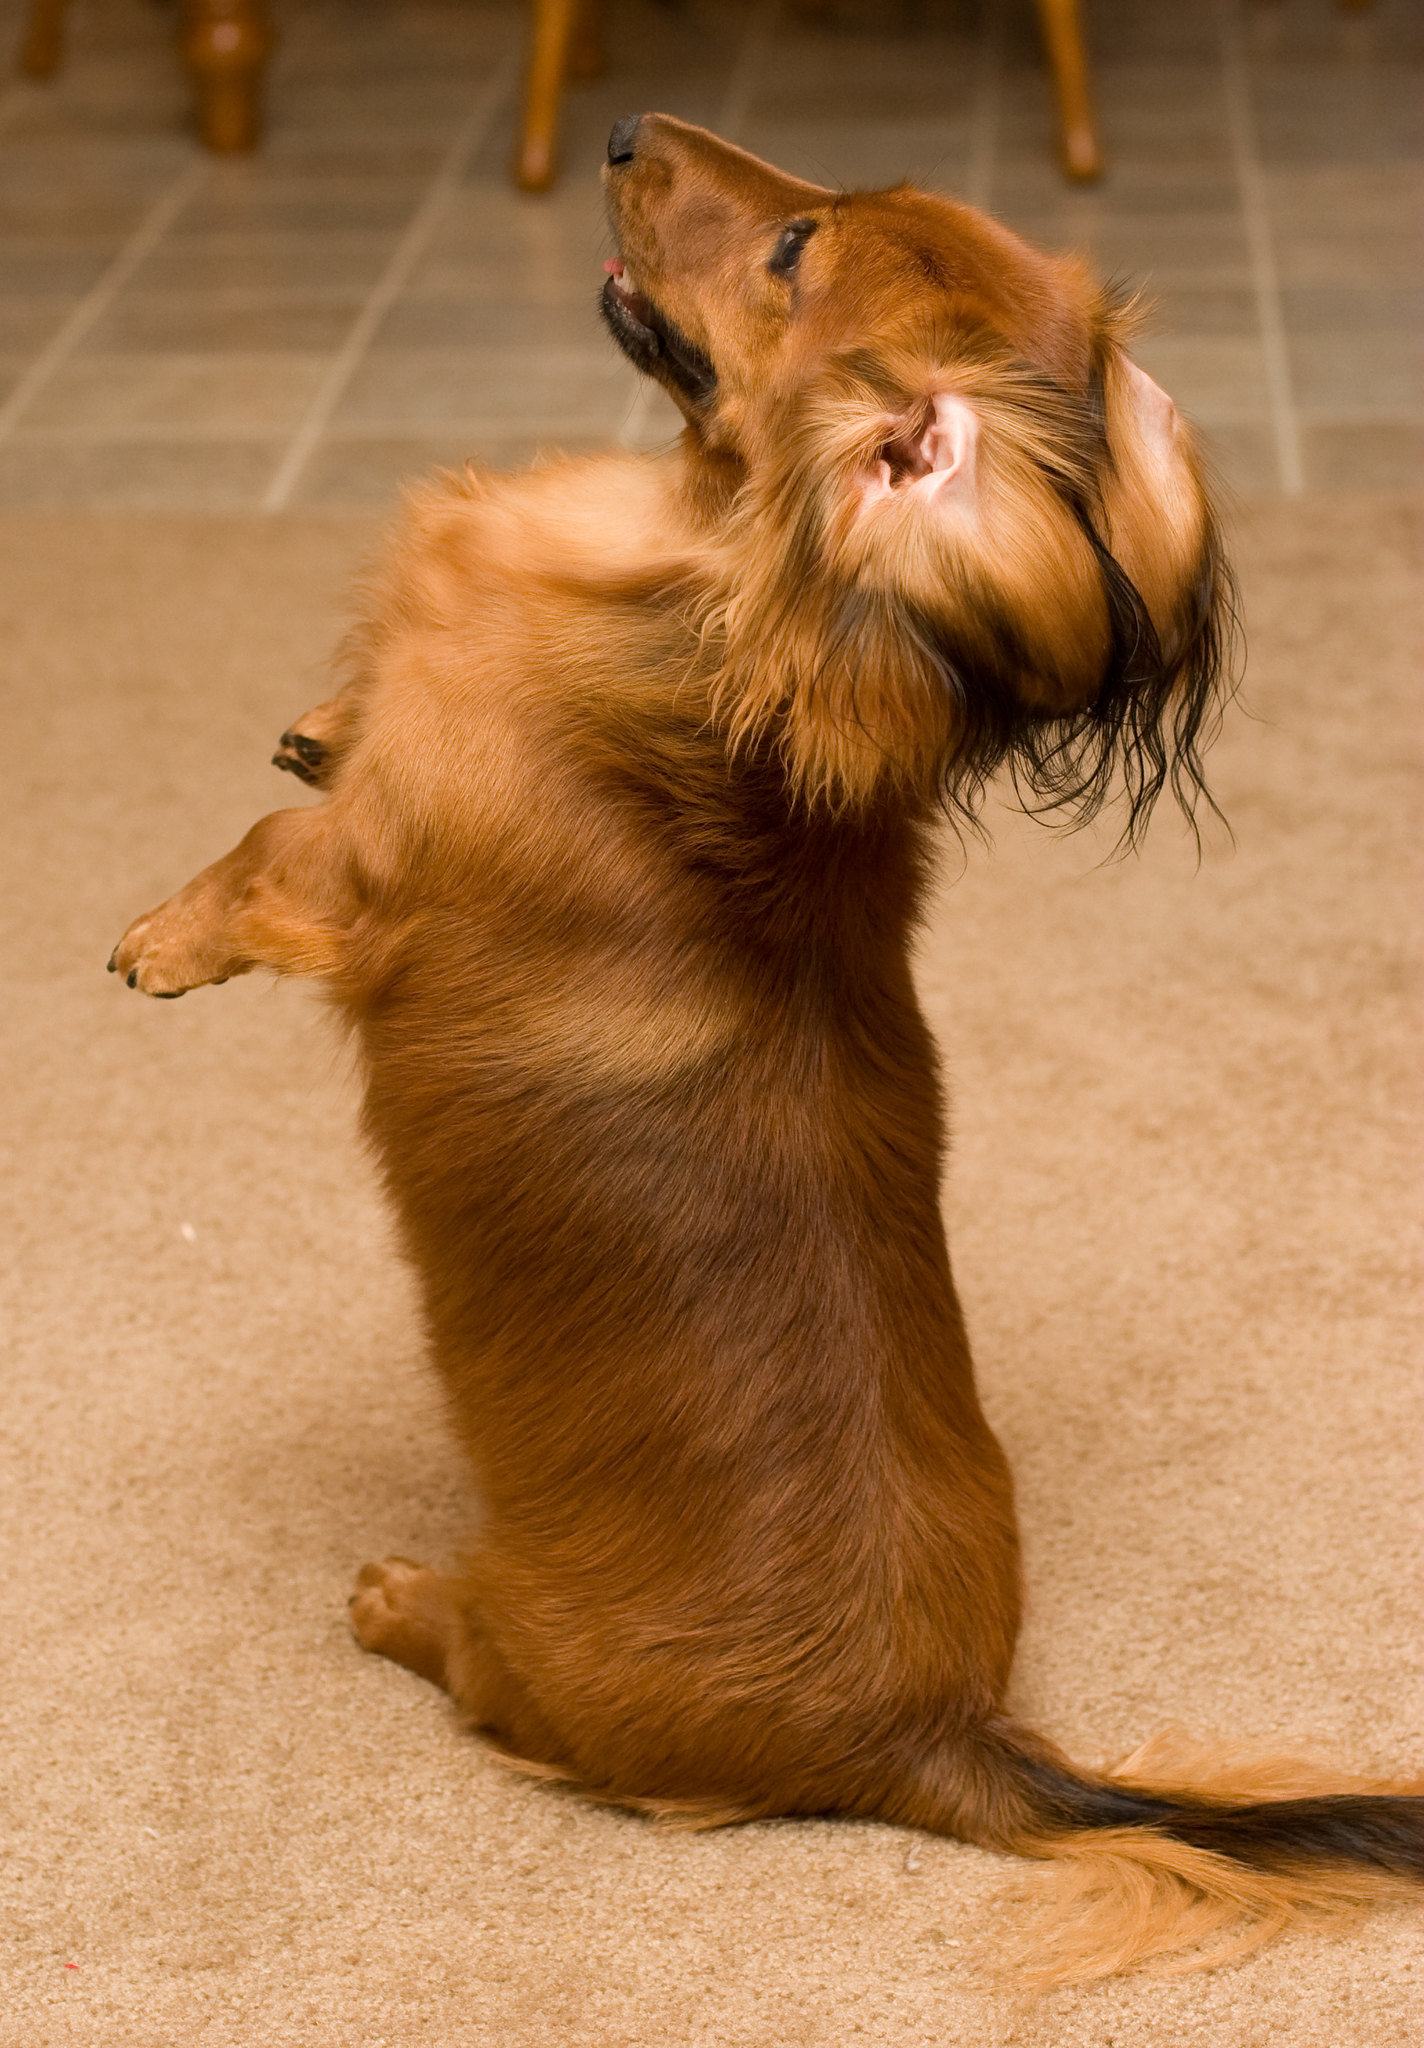 dachshund standing on its hind legs